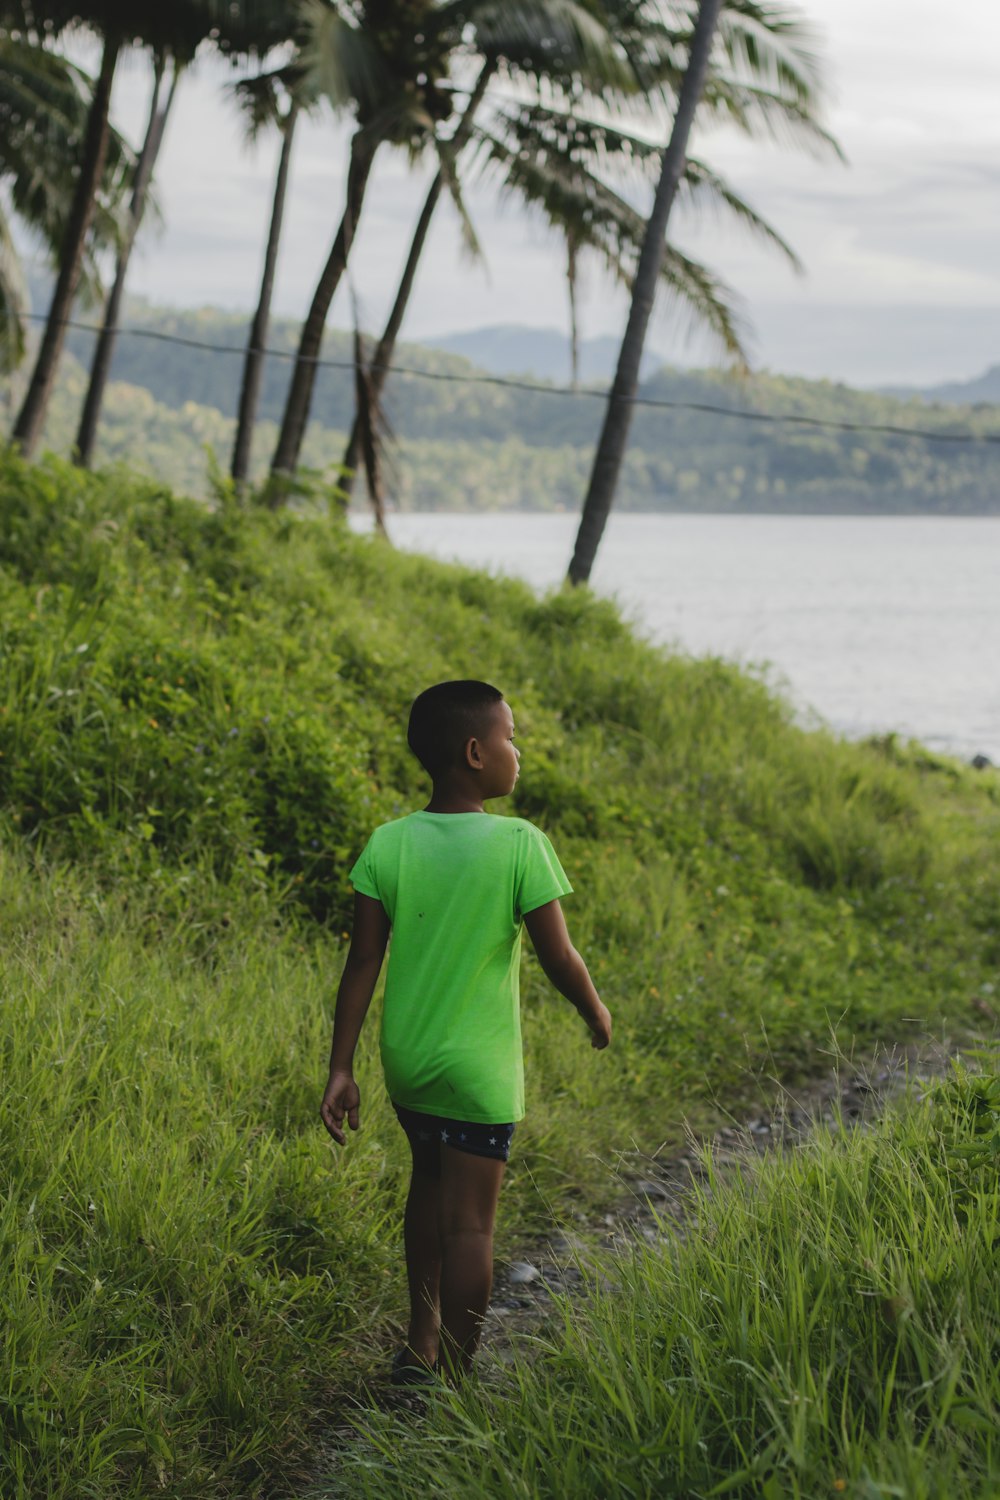 a boy standing in a grassy area next to a body of water